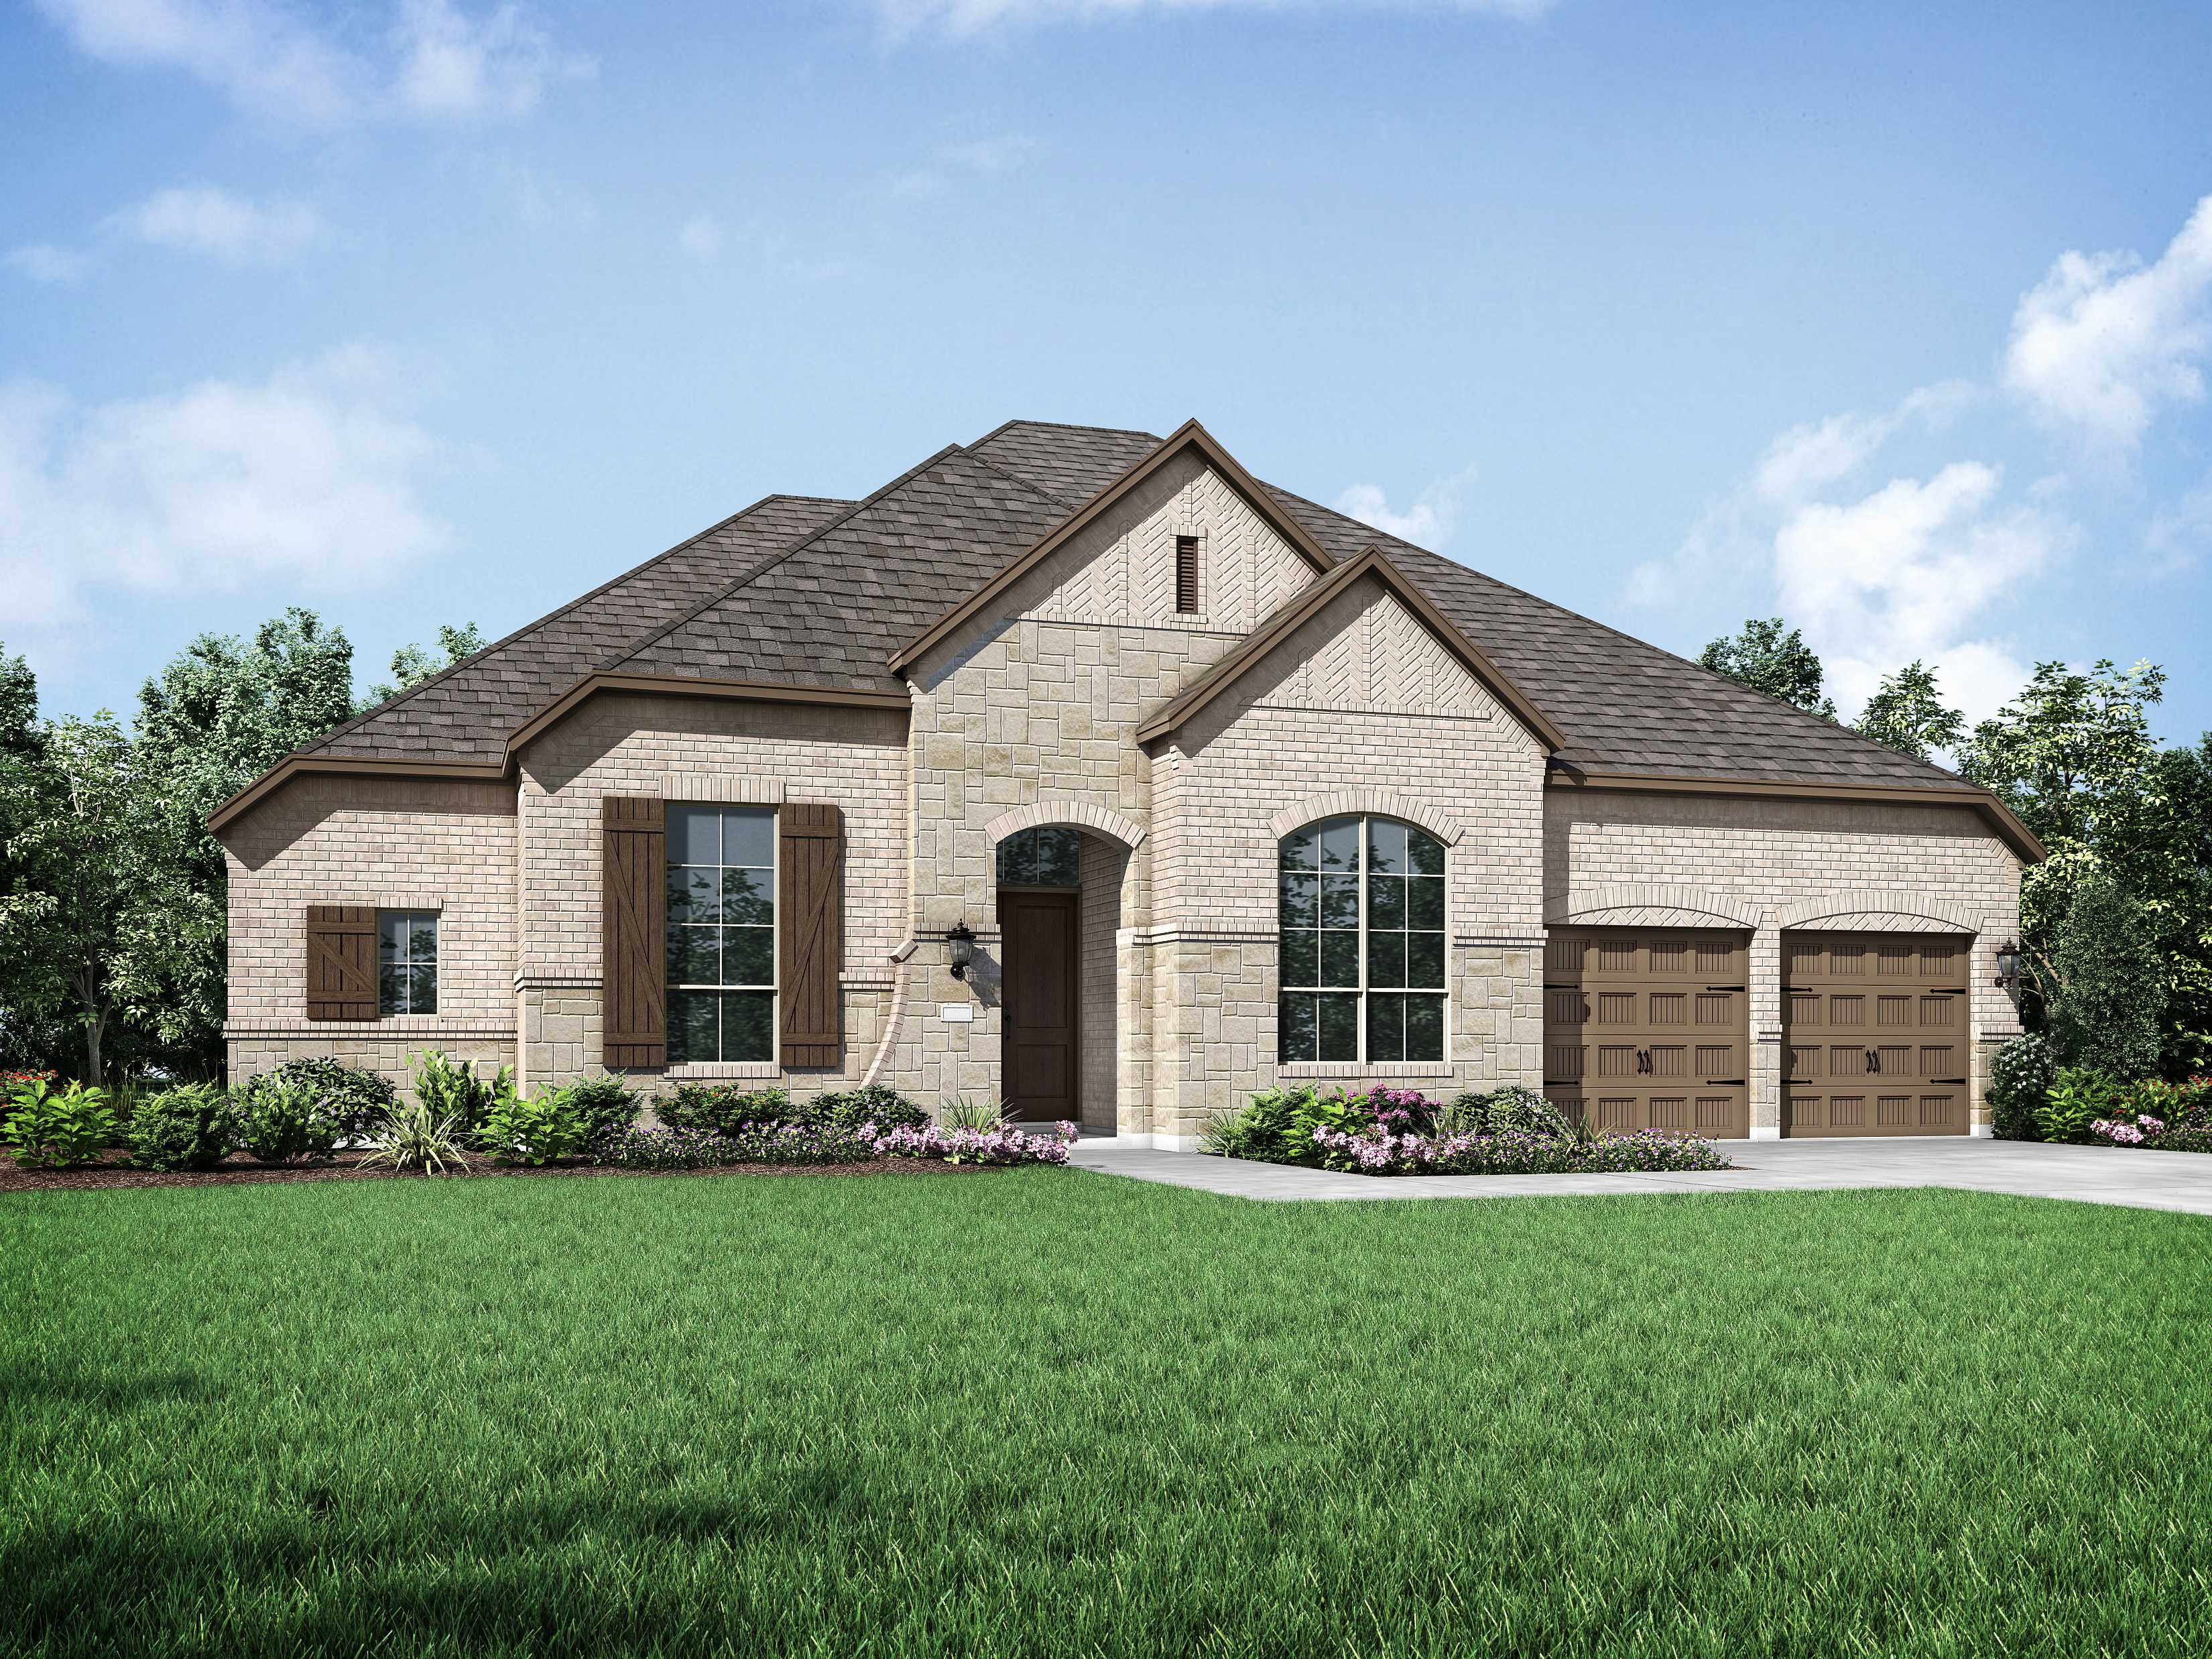 New Home Plan 270 from Highland Homes